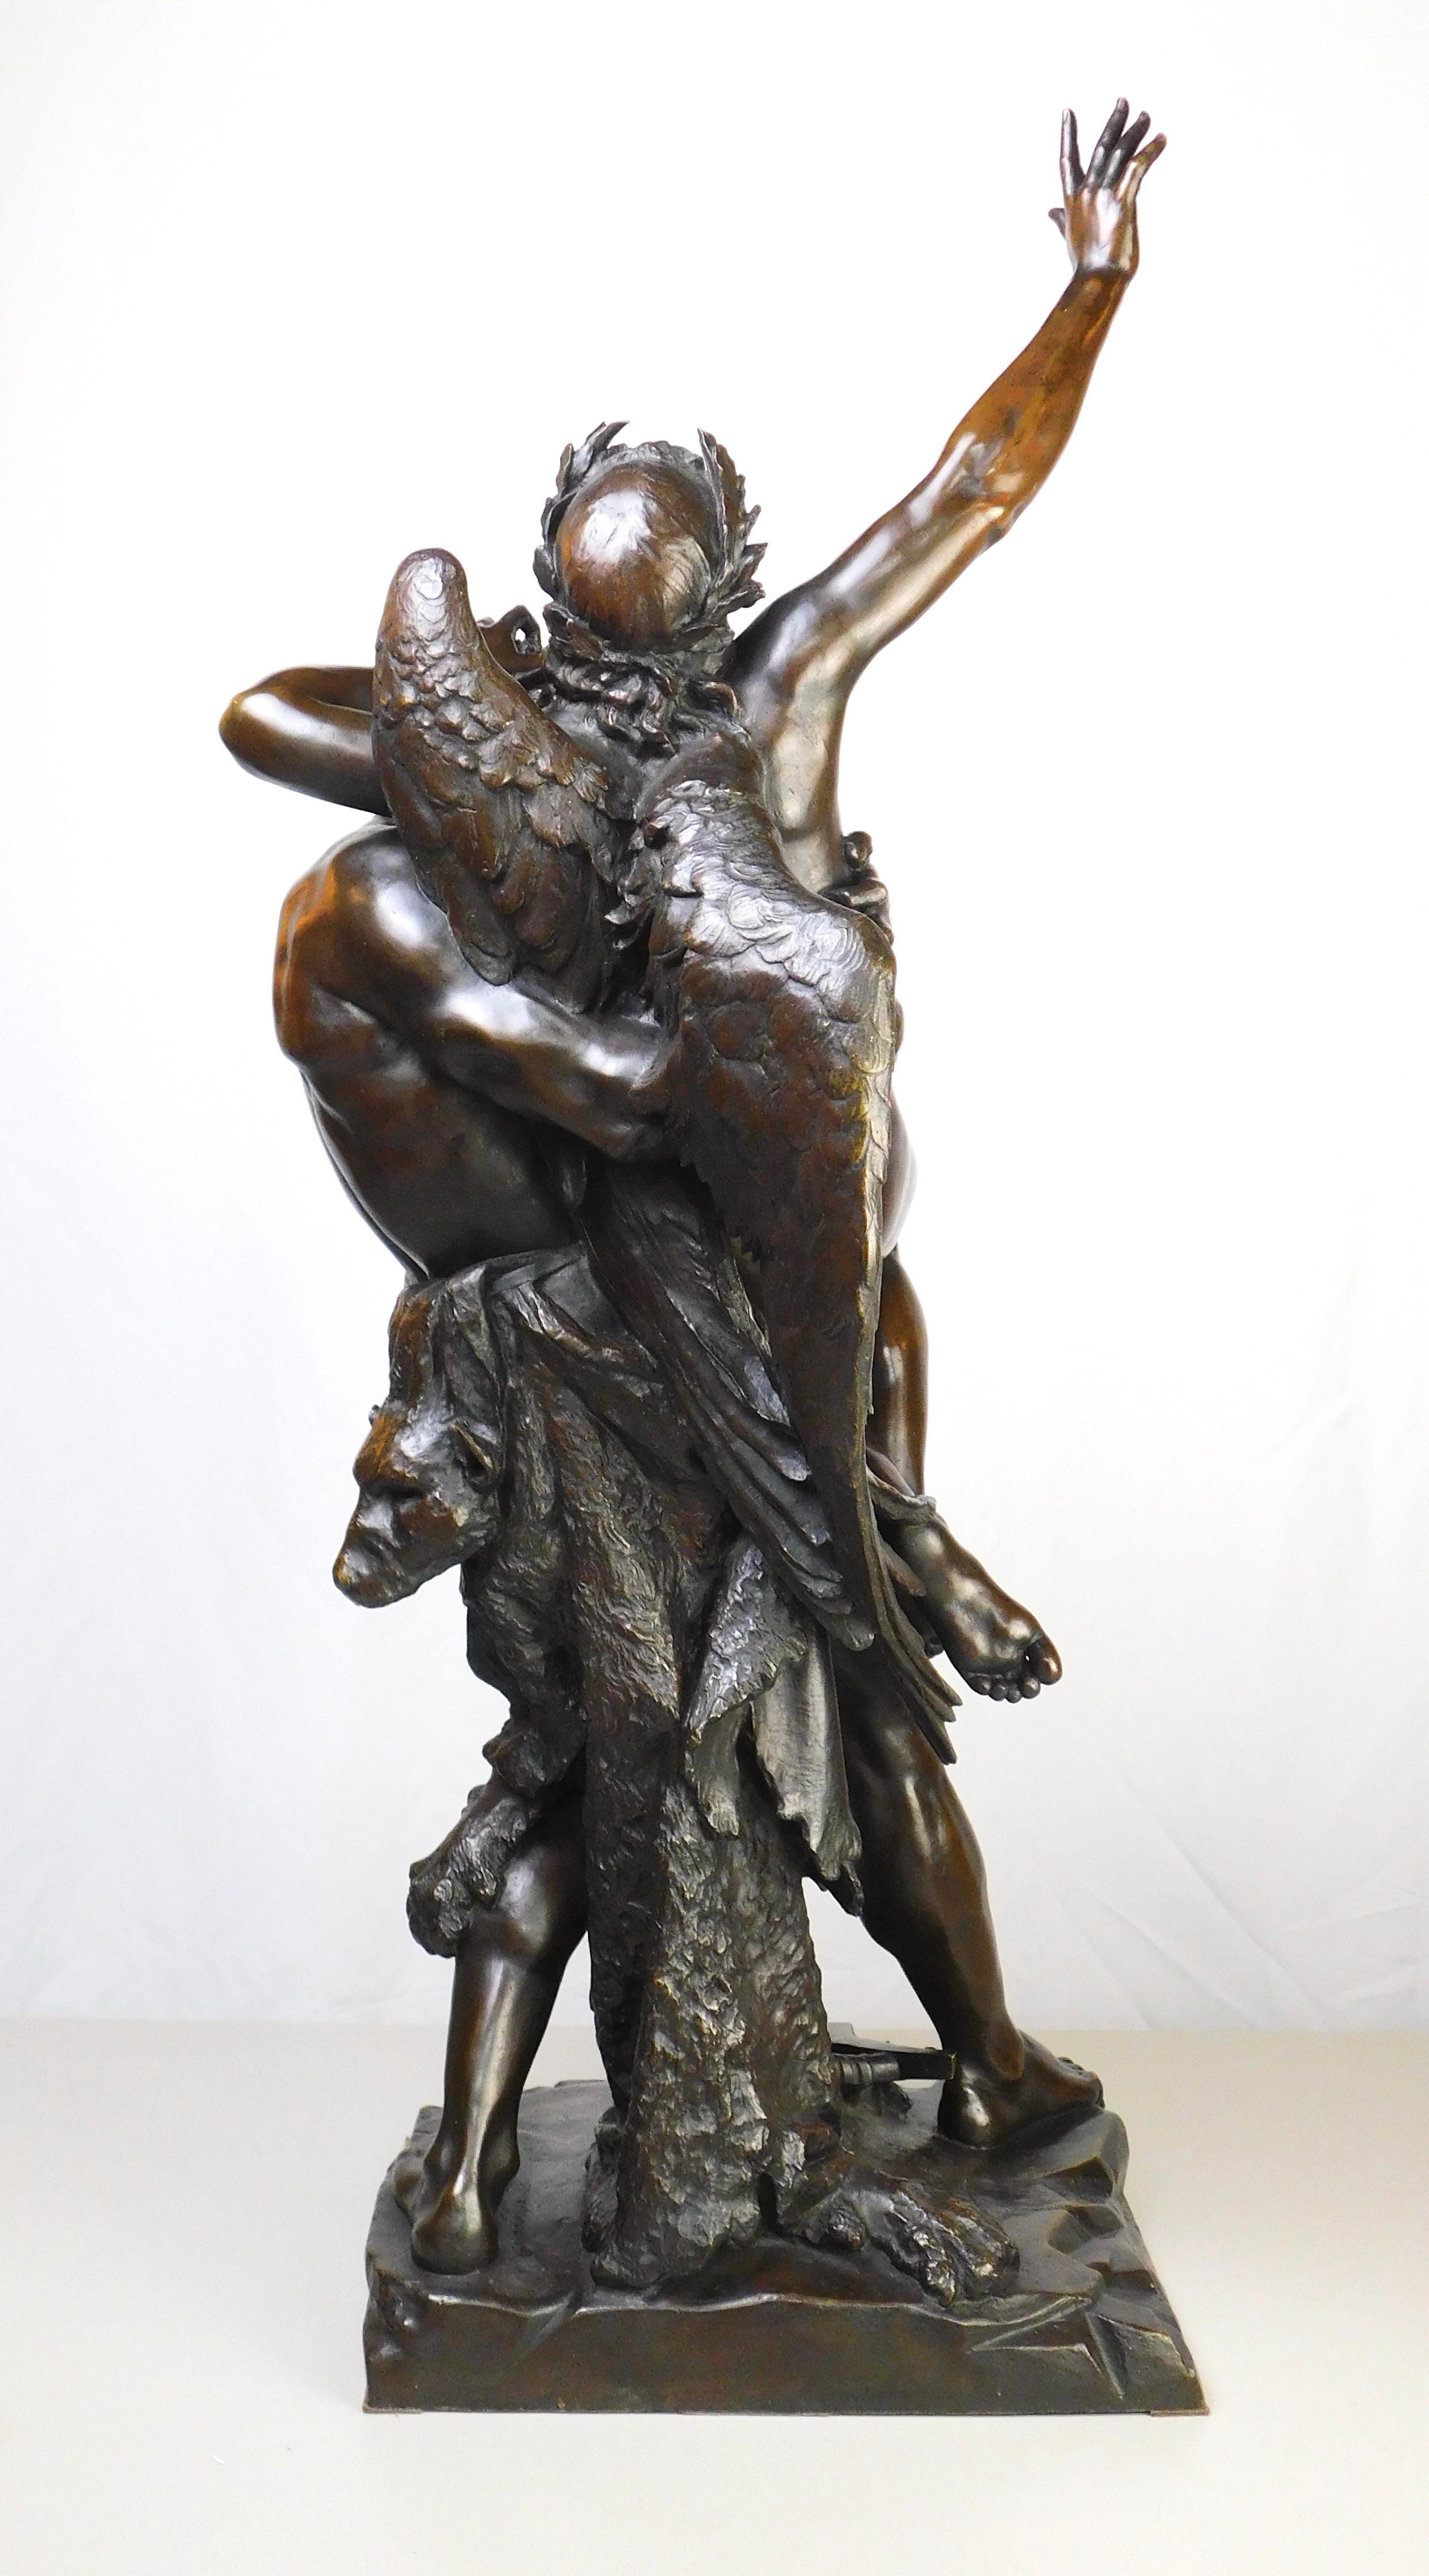 Patinated Antique Bronze Sculpture Genius and Brute Force by Cyprien Godebski For Sale